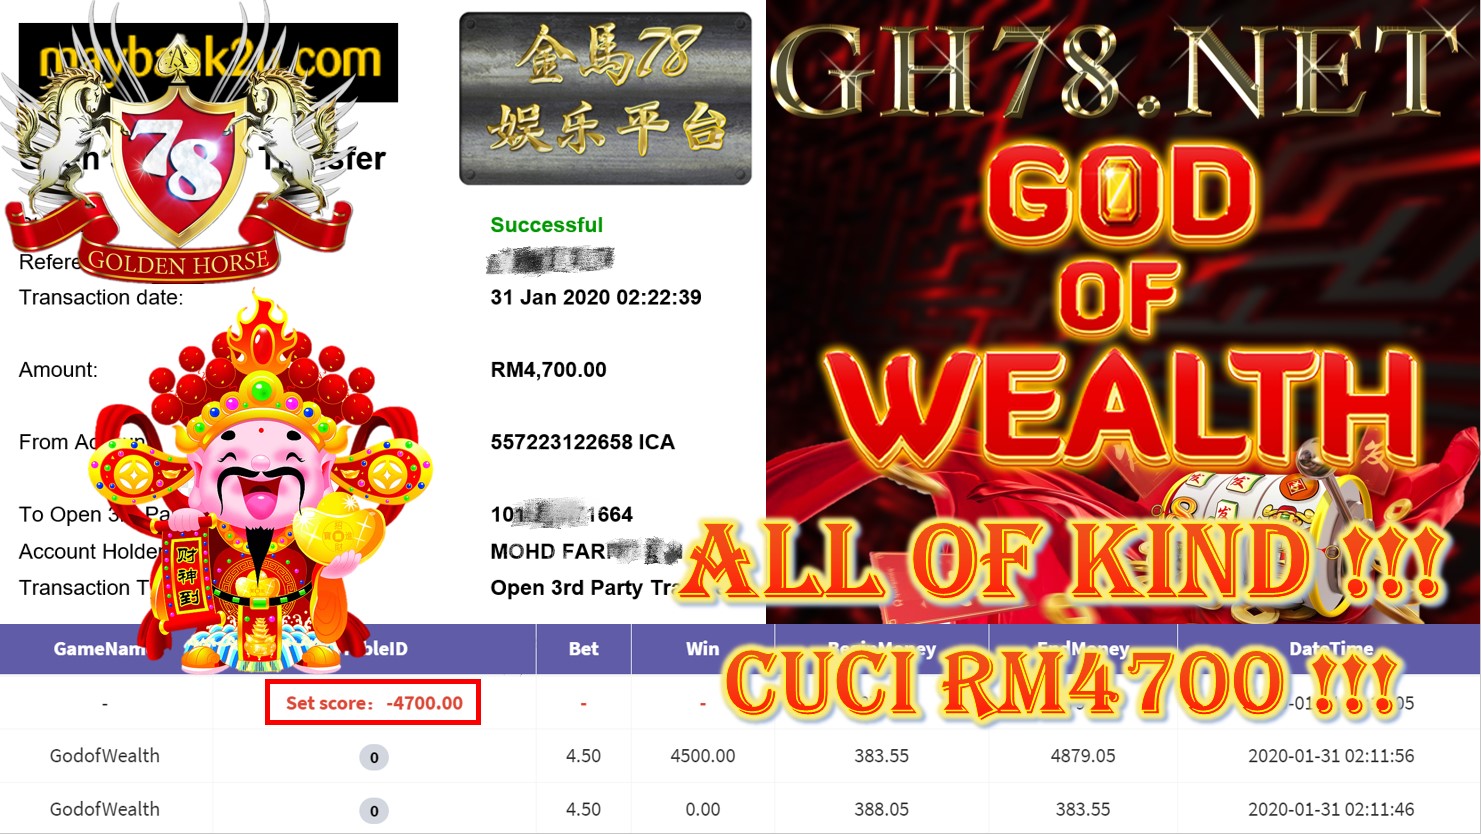 2020 NEW YEAR !!! MEMBER MAIN 918KISS, GOD OF WEALTH ,WITHDRAW RM4700 !!!	